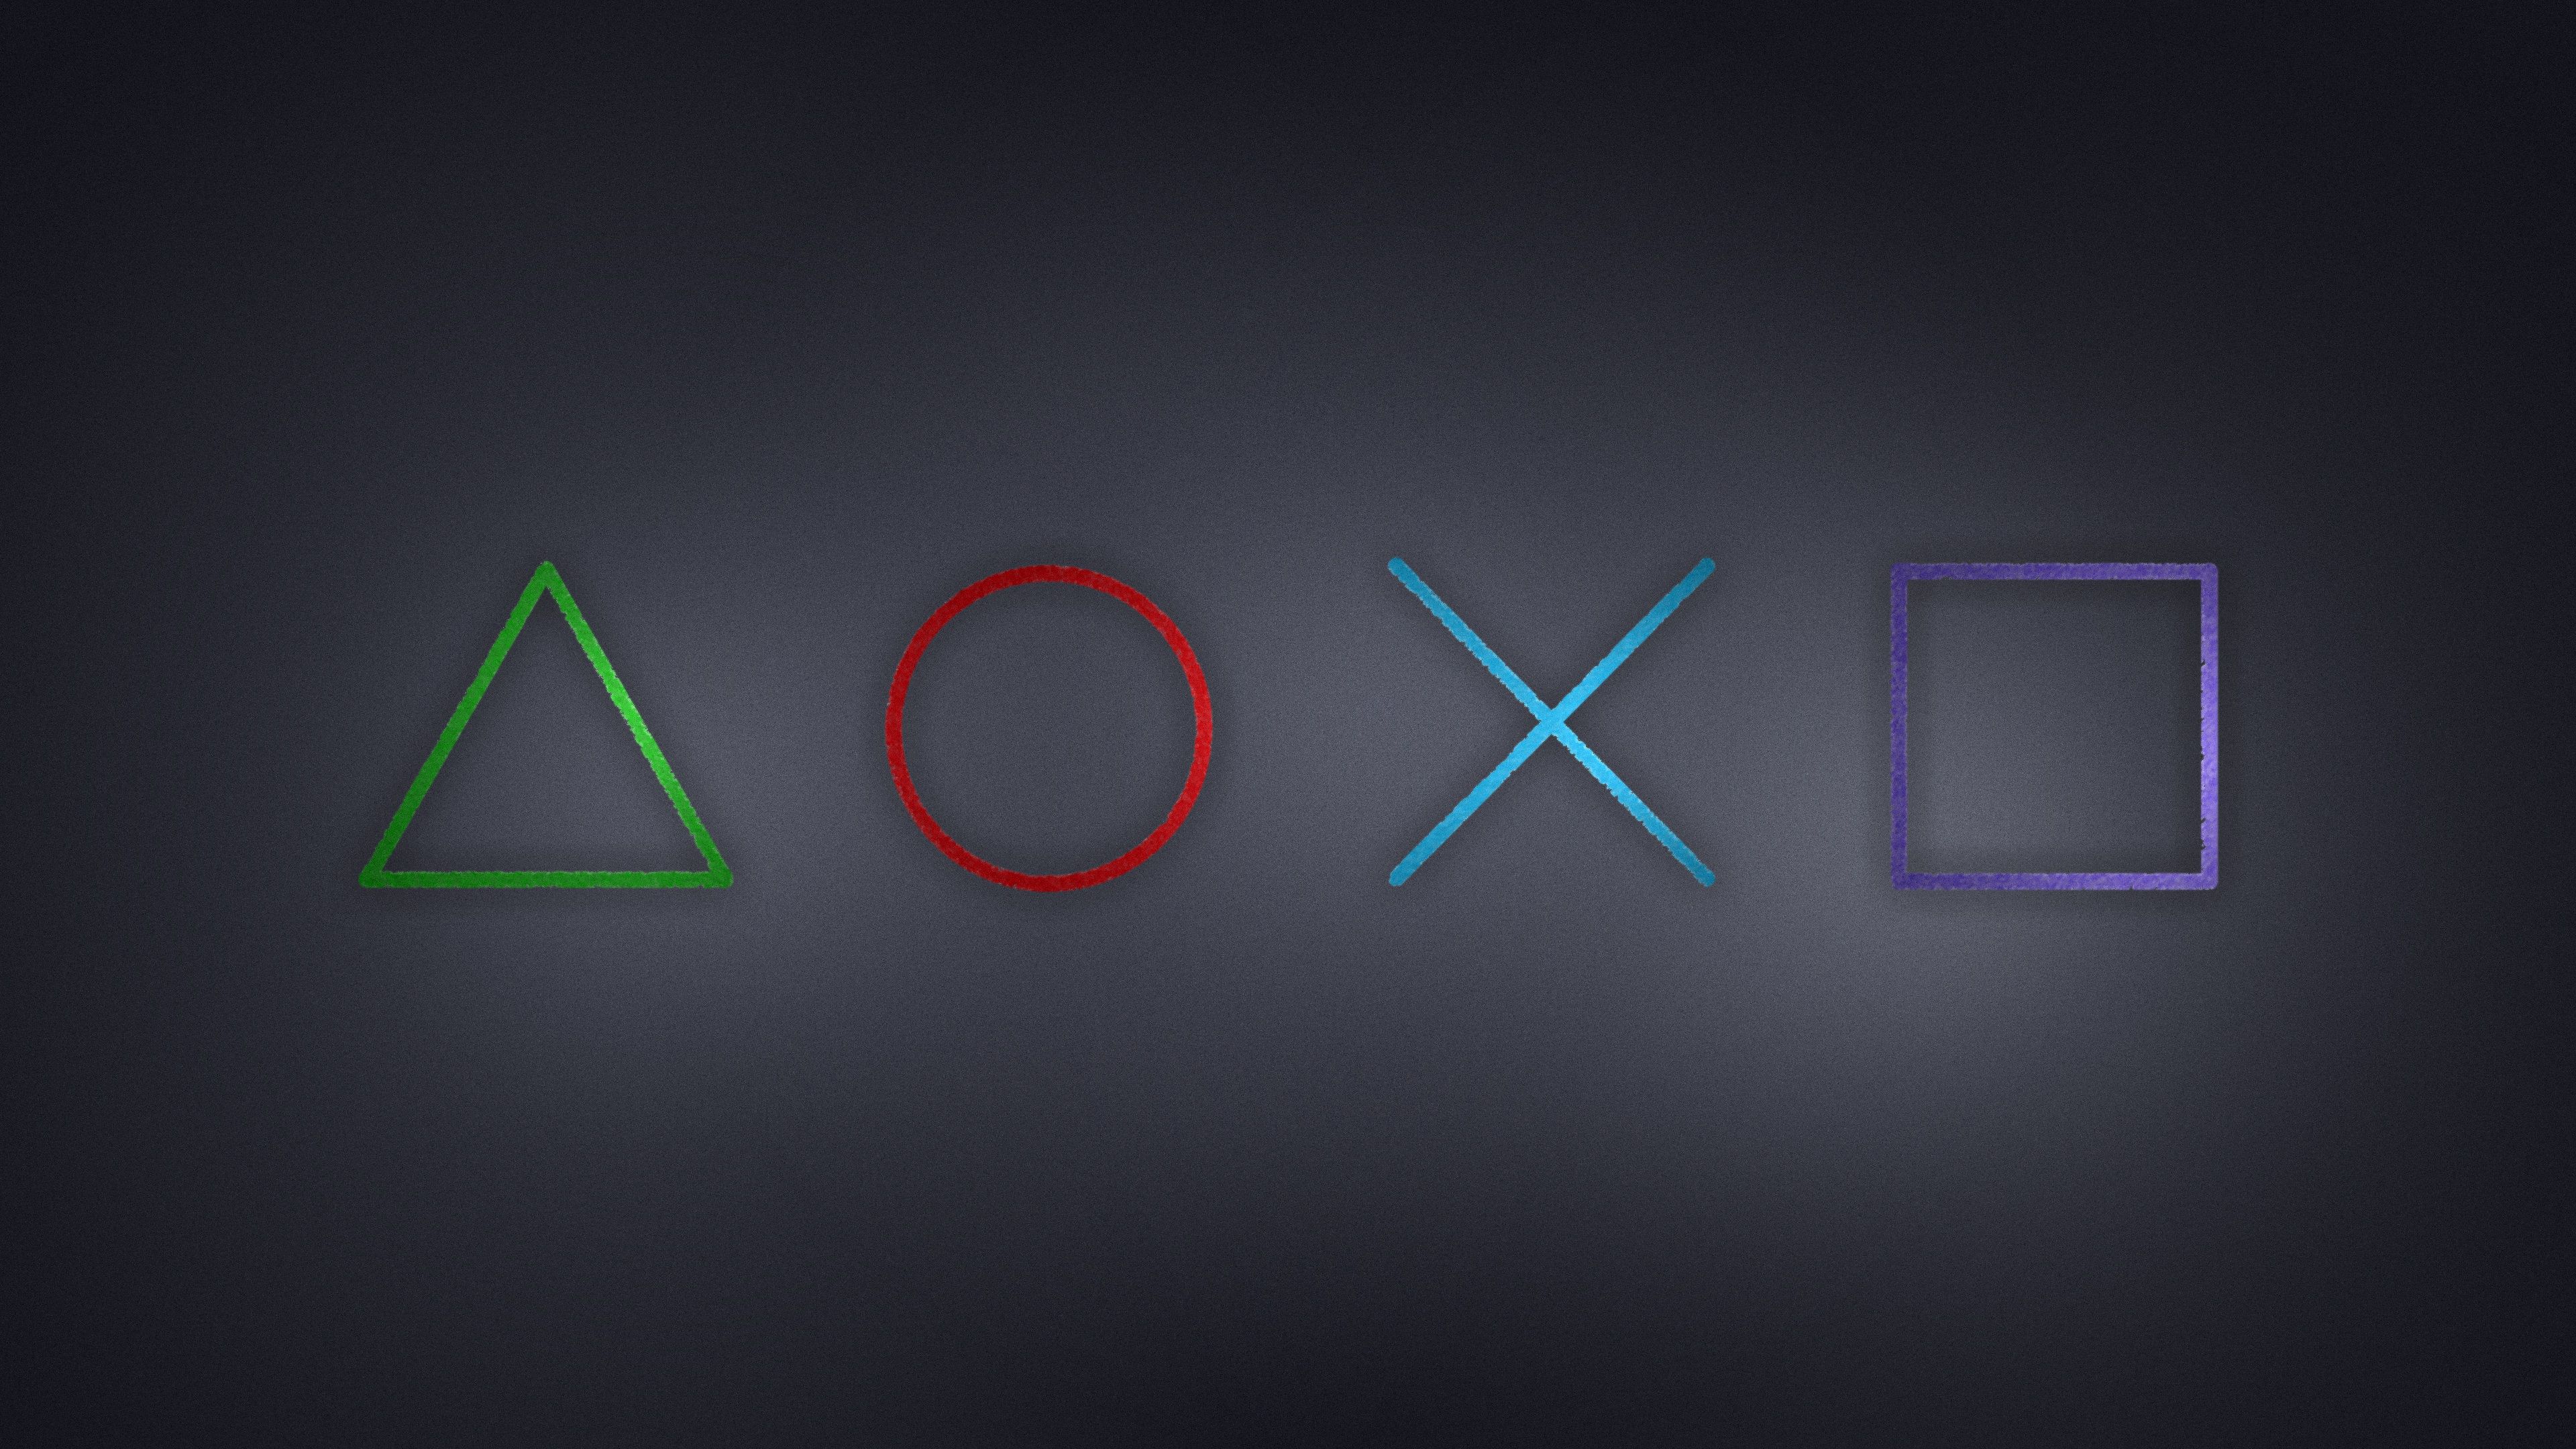 Another Wallpaper with the PlayStation symbols (4k) Image